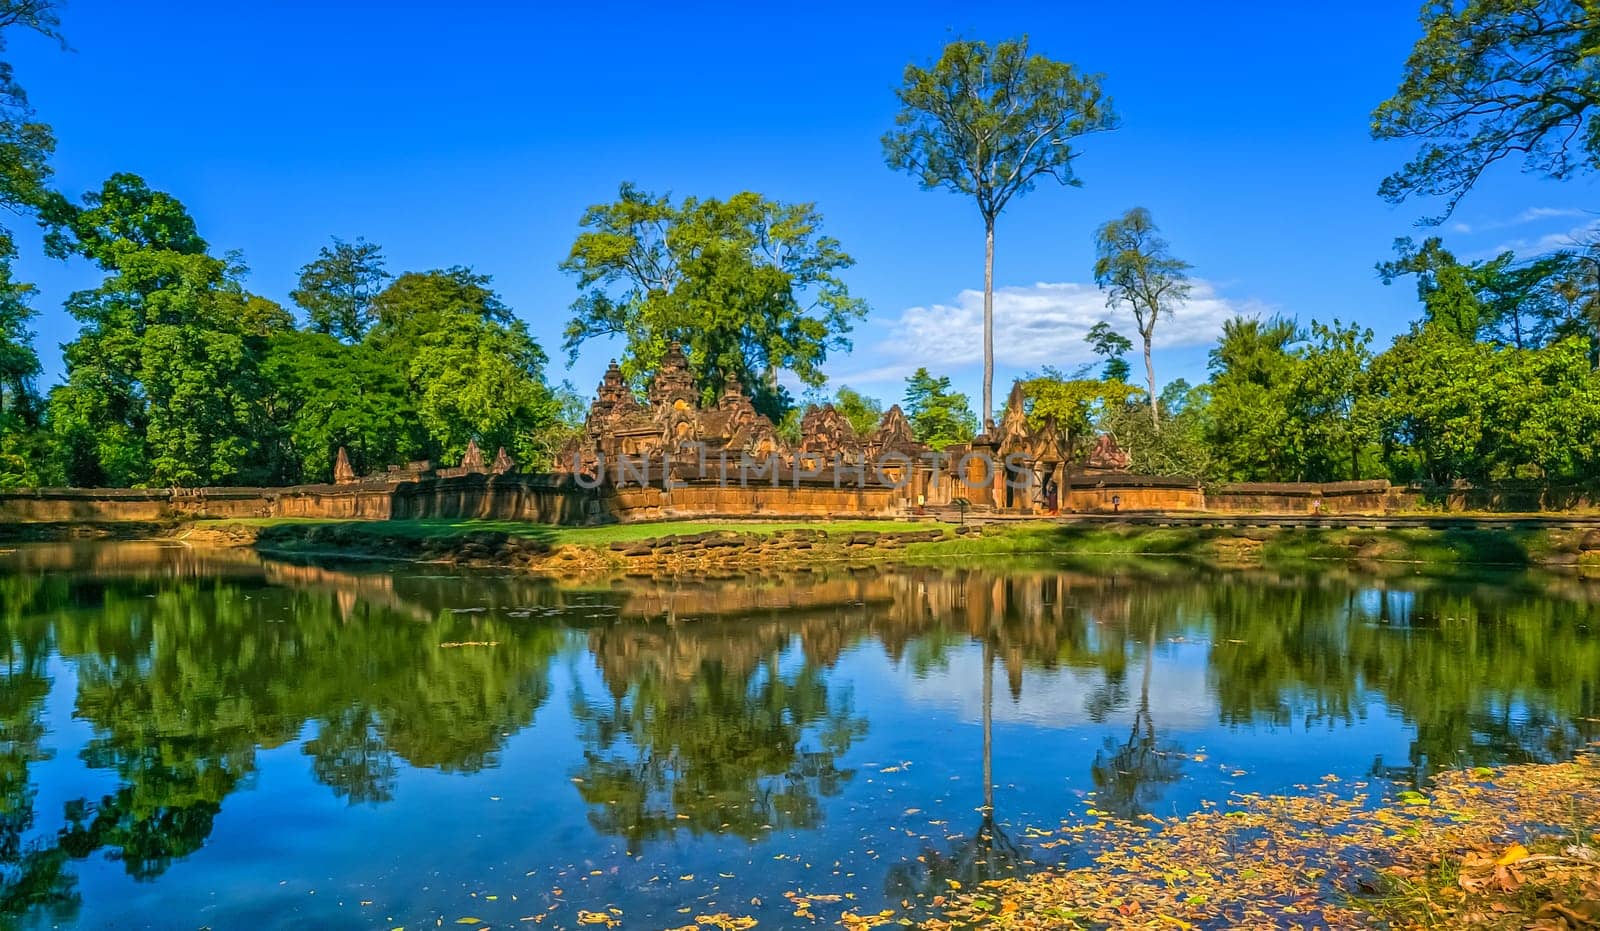 Banteay Srei temple by day at Angkor Thom, Siem Reap, Cambodia